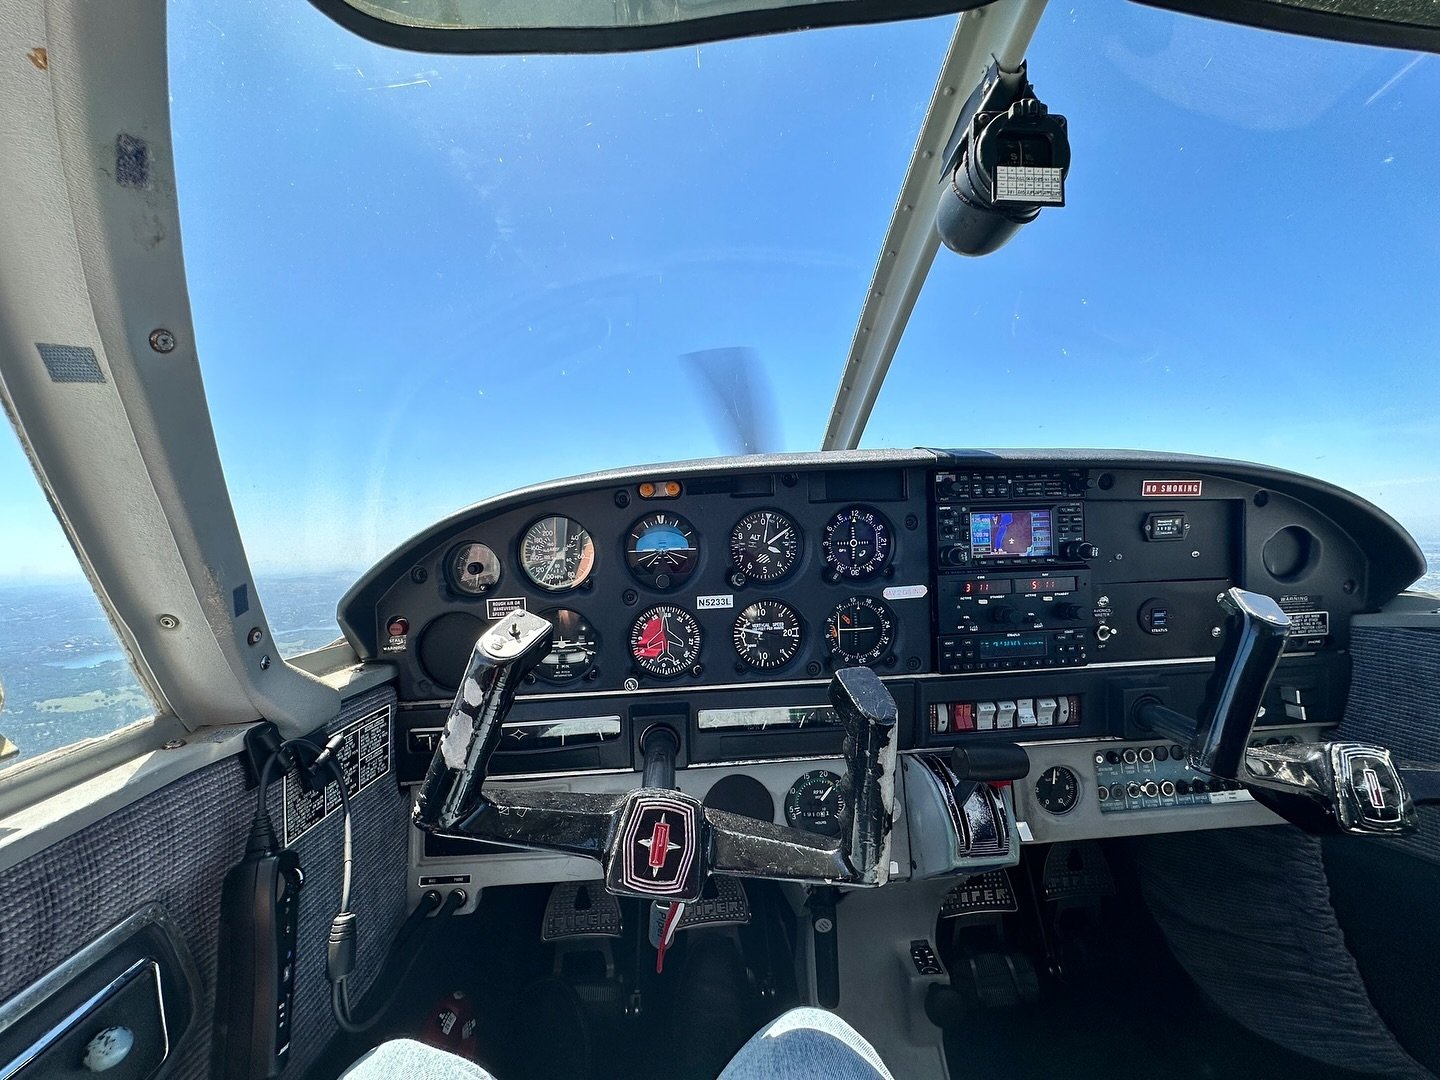 I don&rsquo;t know about you, but I love a good panel shot 📸 Hope everyone is having a good sunny ☀️ weekend! 
&bull;
&bull;
&bull;
#weekend #aviation #pilot #pilotlife #auburnairport